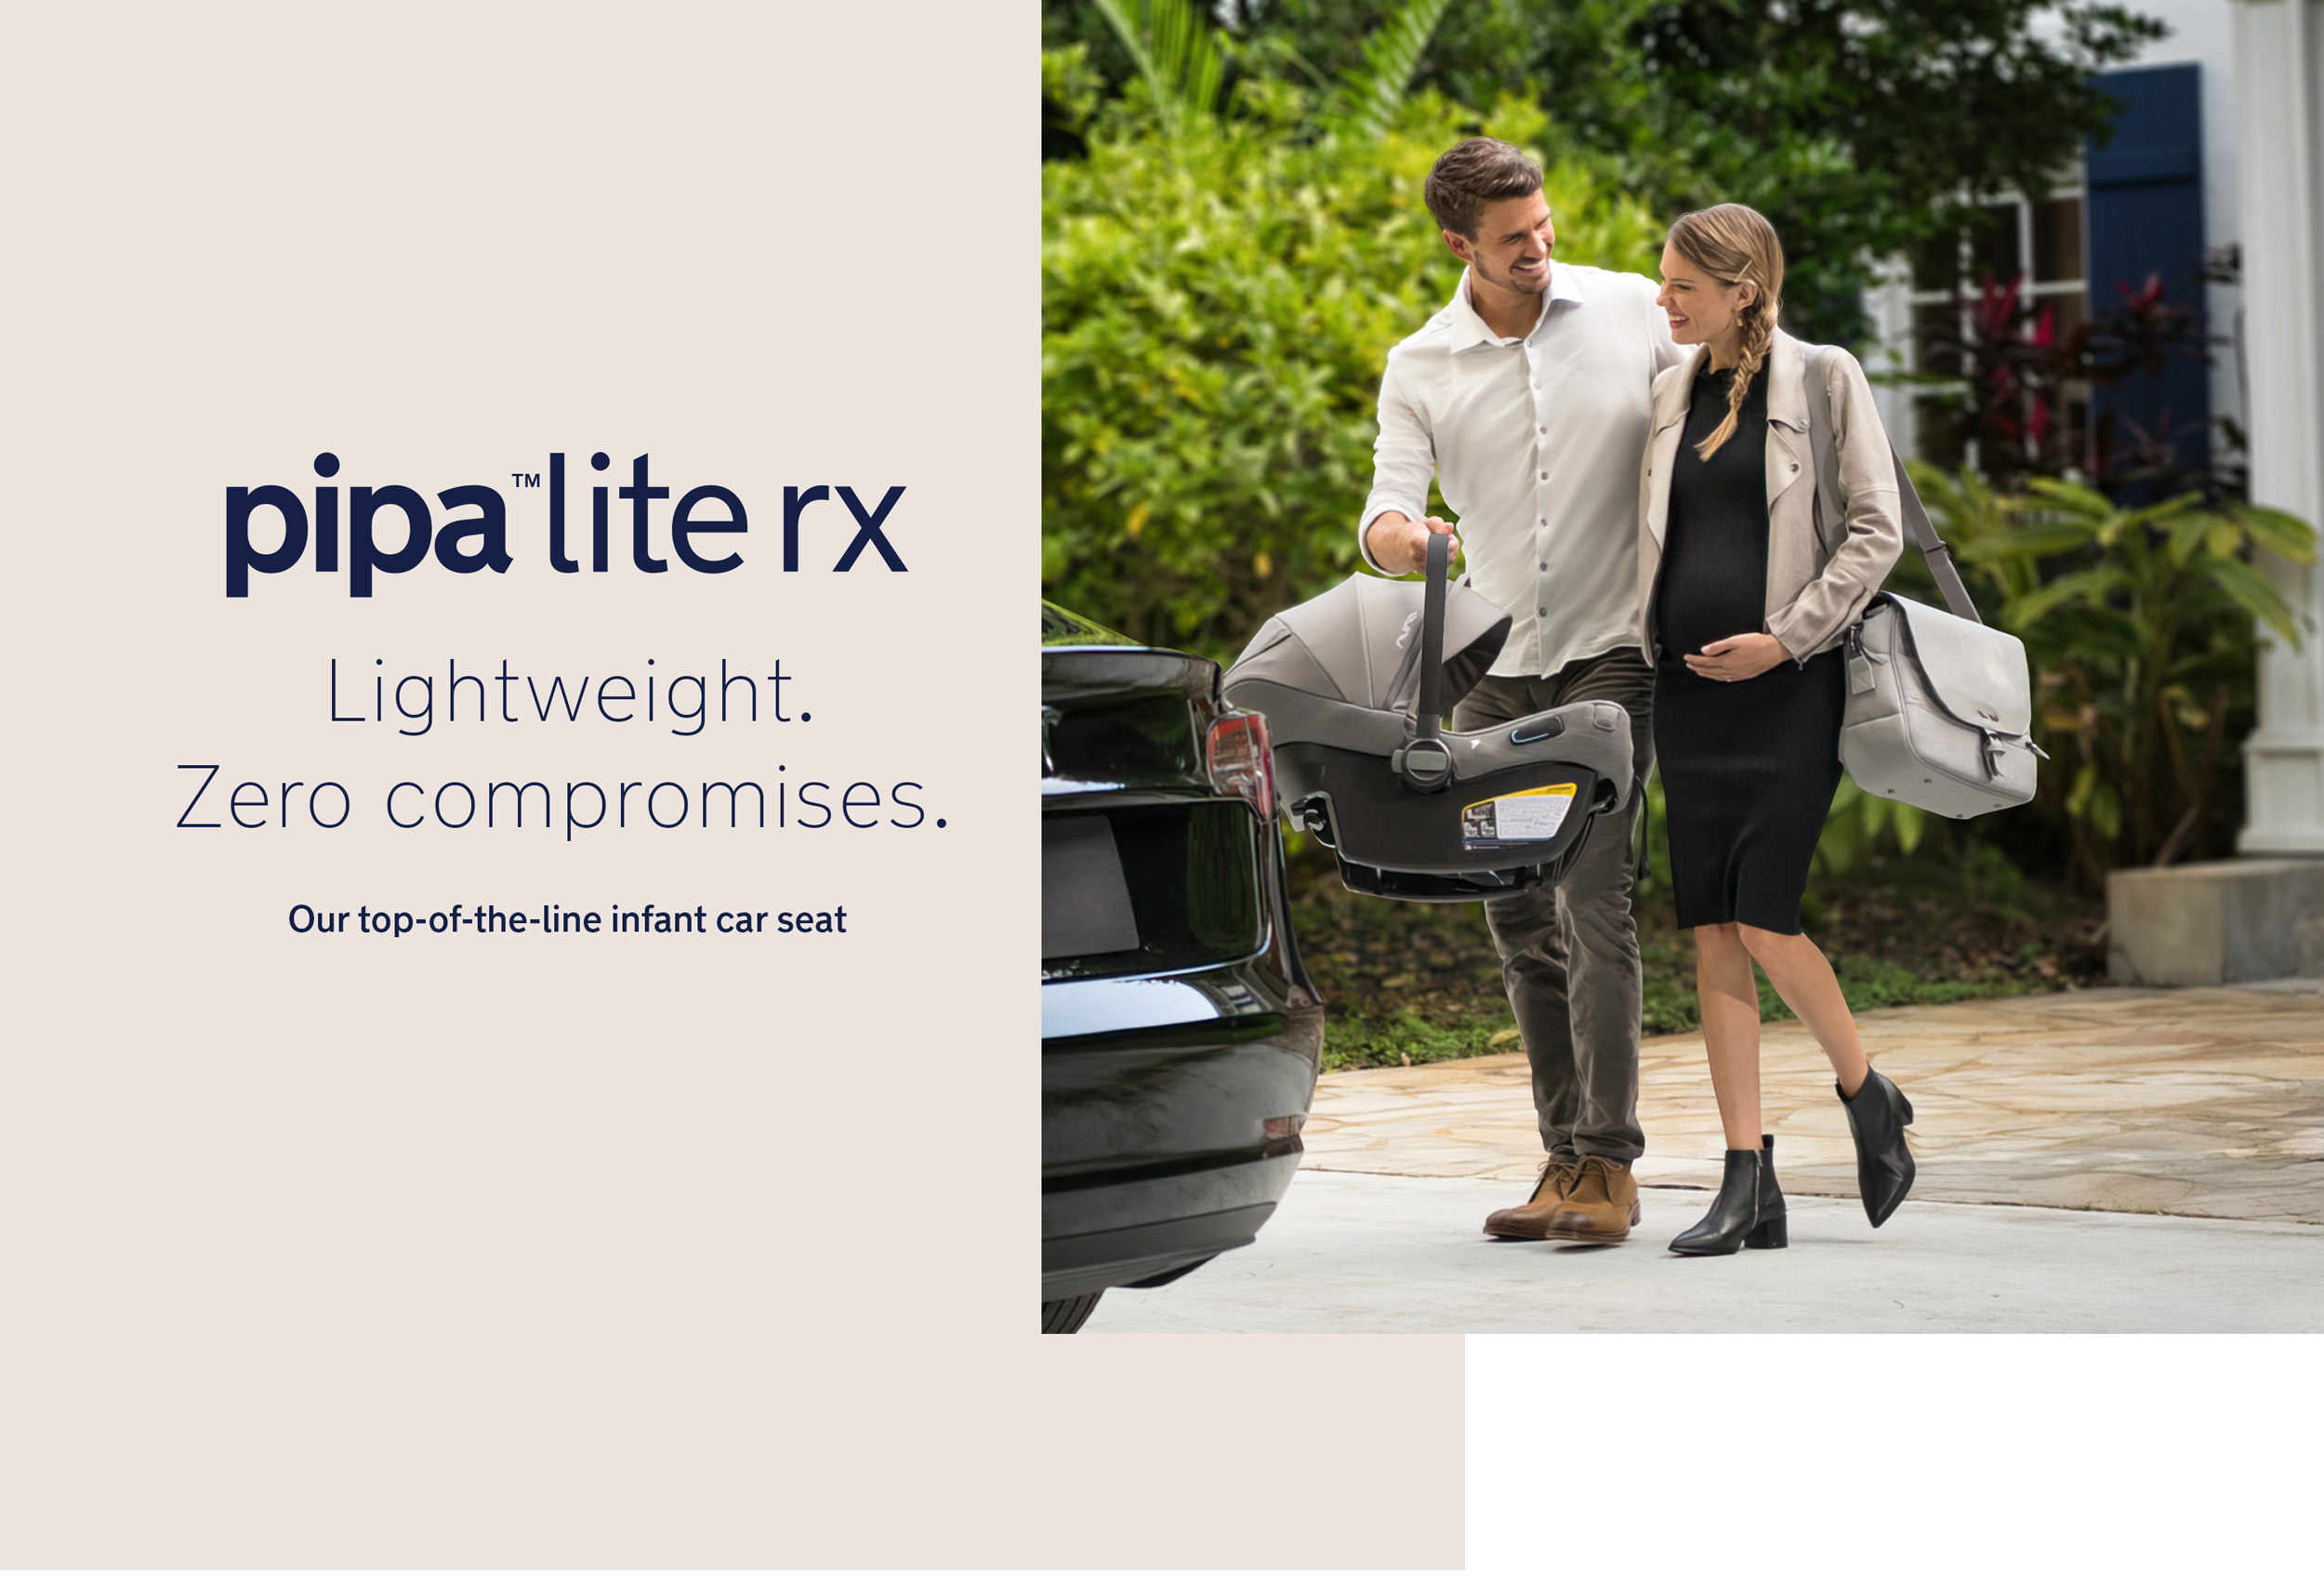 PIPA lite rx | Lightweight. Zero compromises. Our top of the line infant car seat